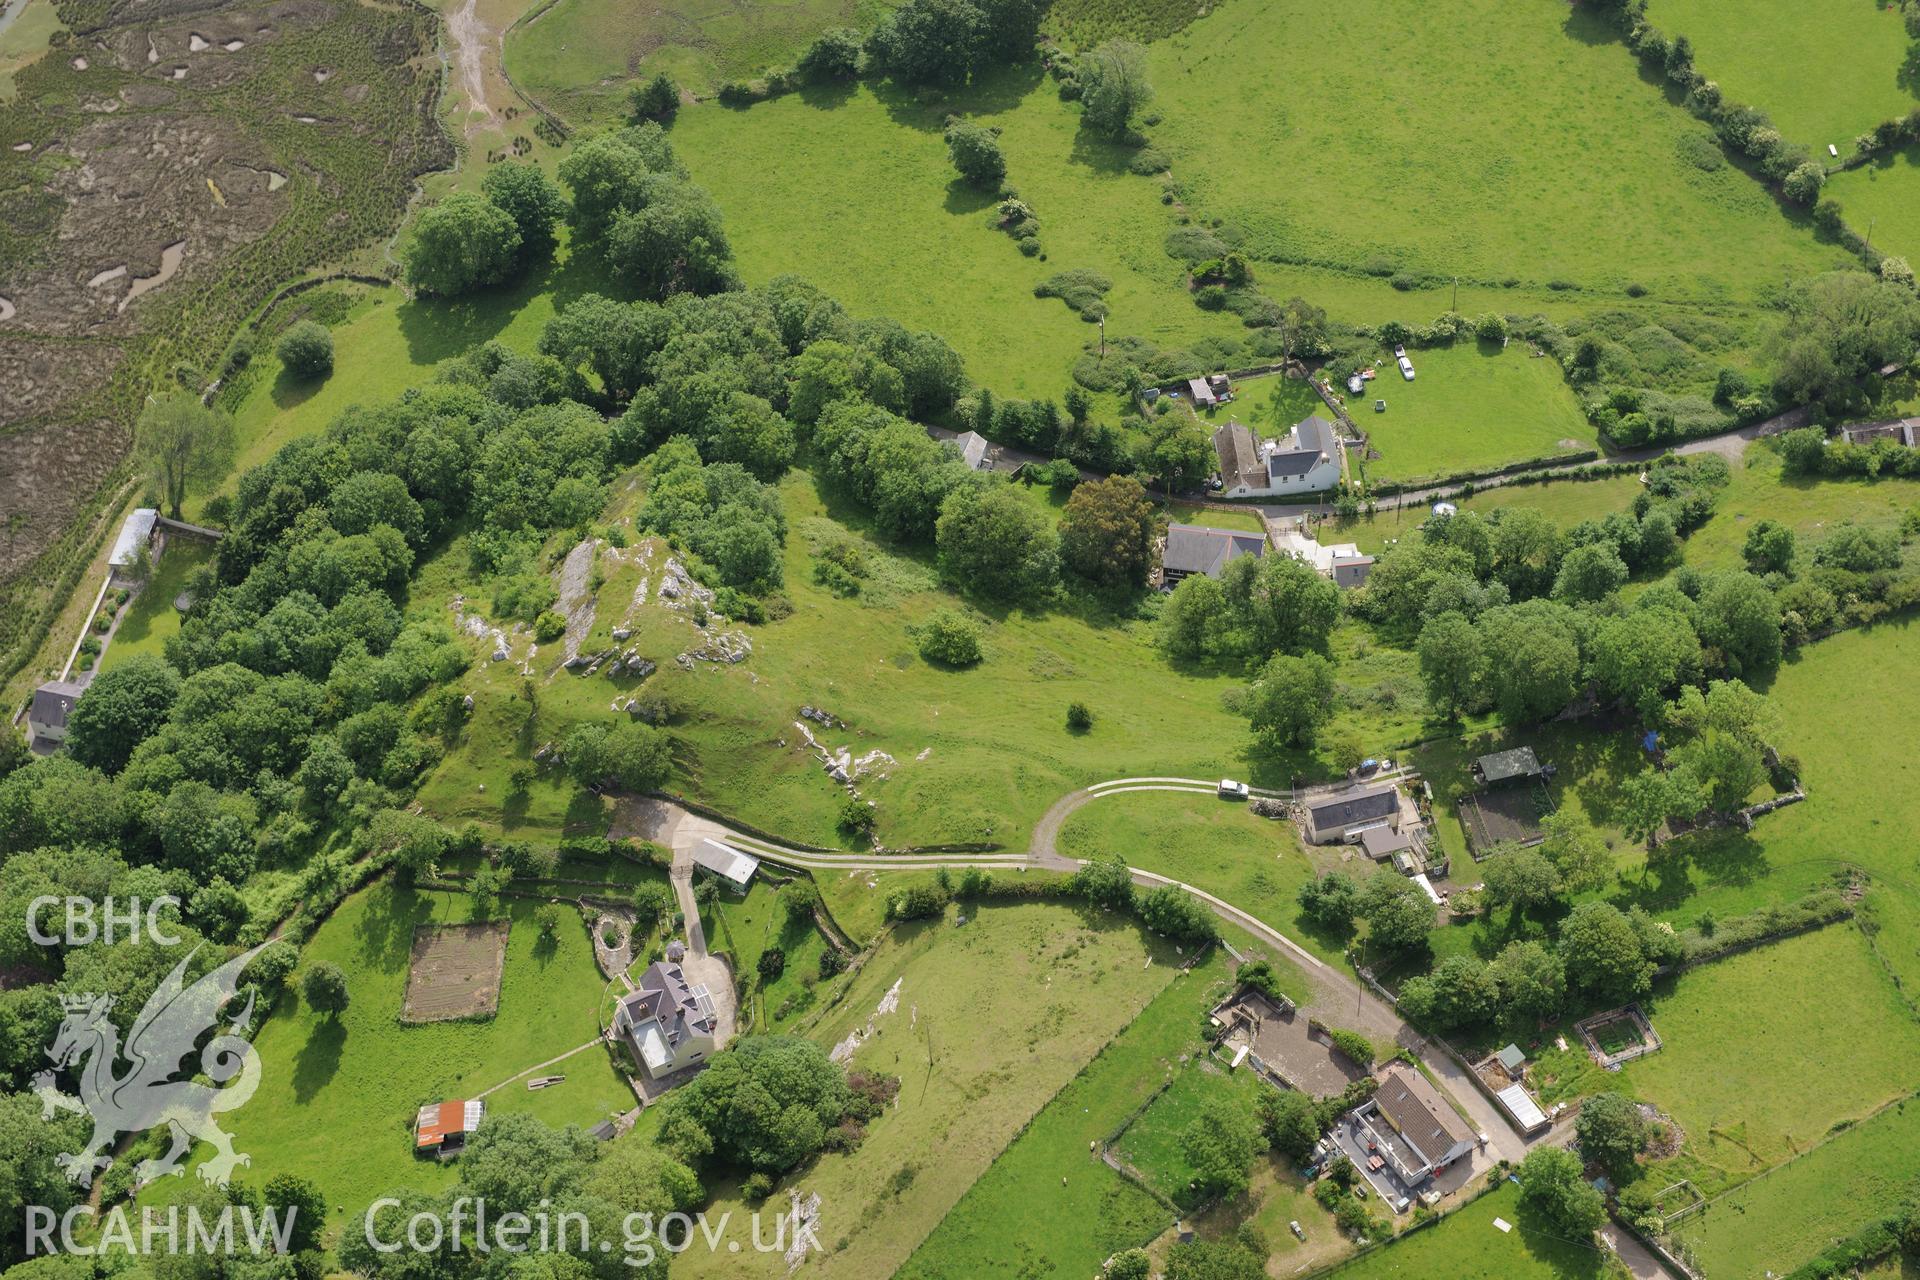 Landimor Castle (also known as Bovehill Castle) and Bovehill Castle cottage. Oblique aerial photograph taken during the Royal Commission's programme of archaeological aerial reconnaissance by Toby Driver on 19th June 2015.